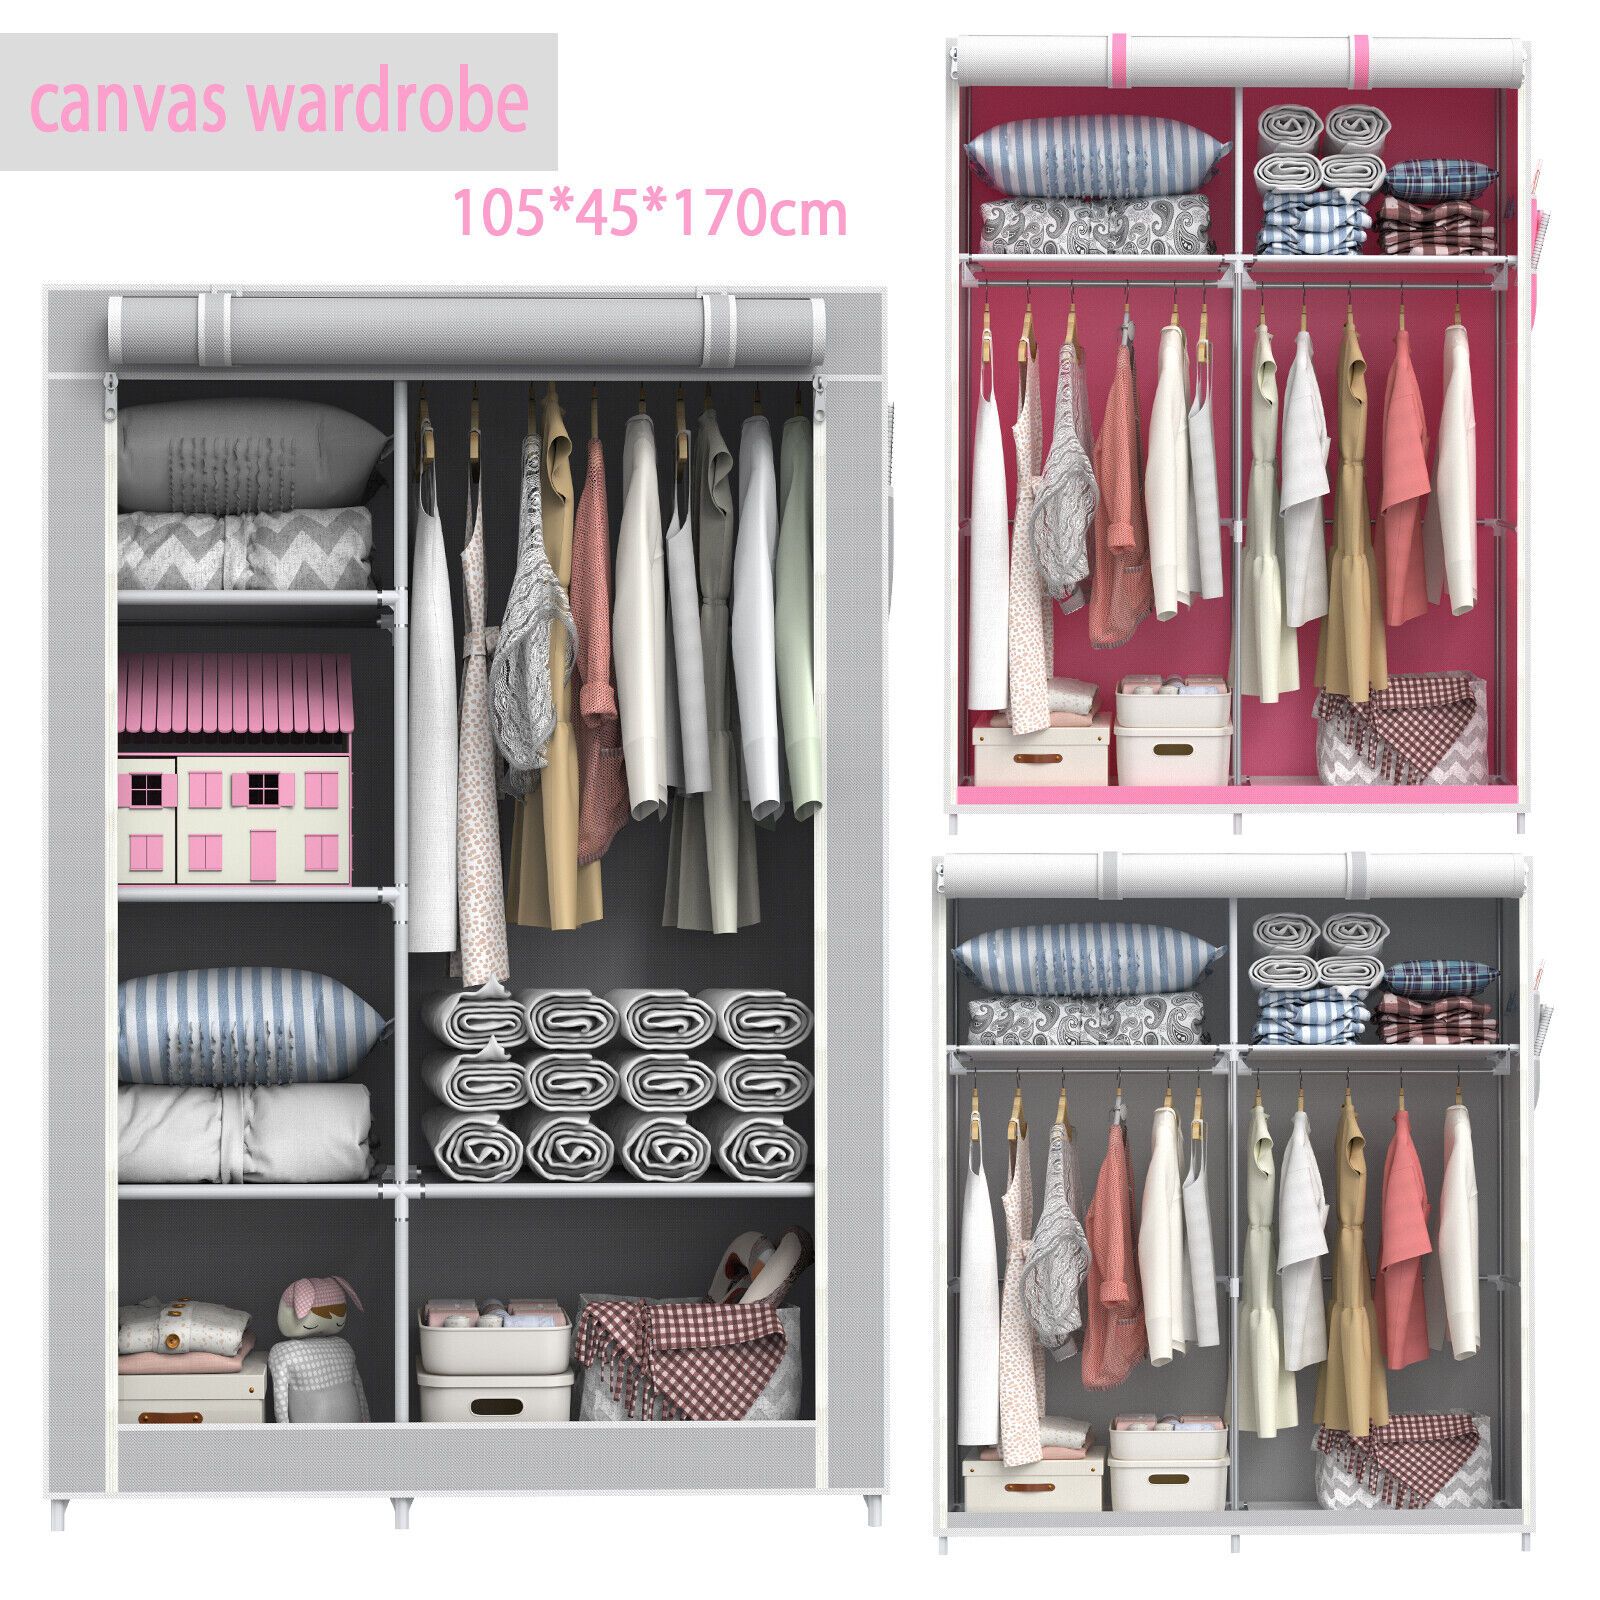 Double Fabric Canvas Wardrobe With Clothes Hanging Rail Storage Shelves  Cupboard | Ebay Within Double Rail Canvas Wardrobes (Photo 1 of 15)